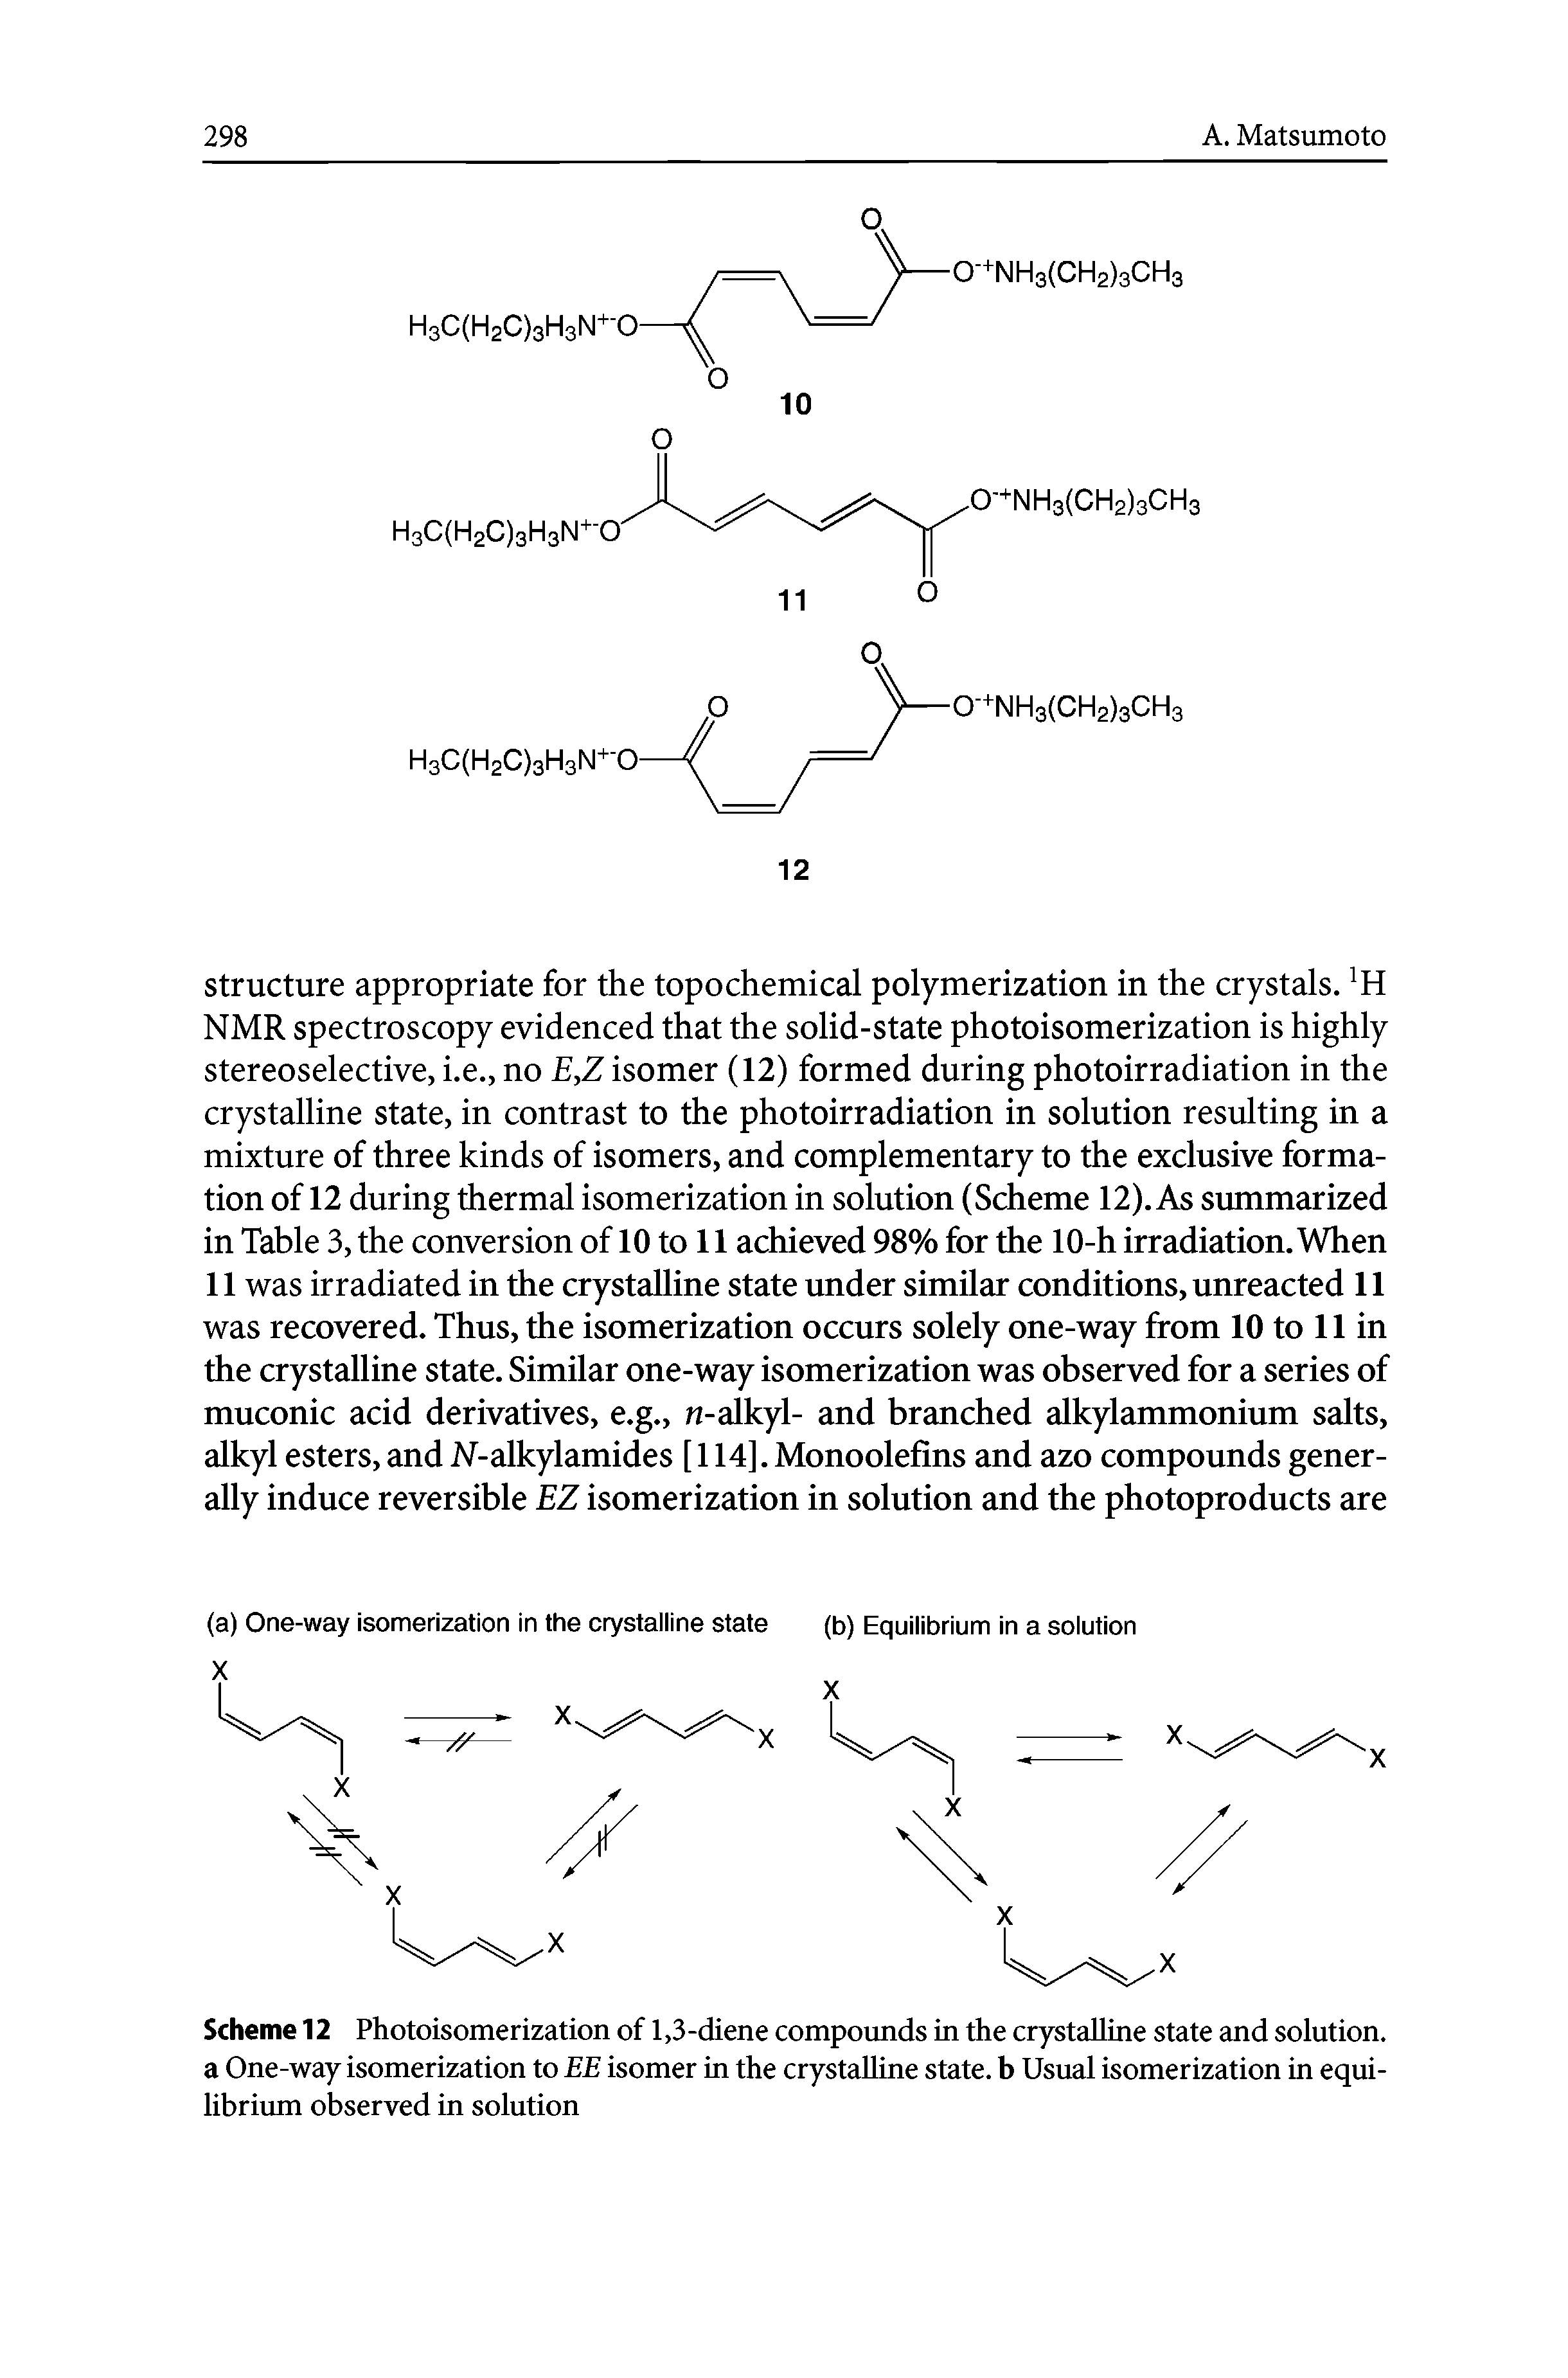 Scheme 12 Photoisomerization of 1,3-diene compounds in the crystalline state and solution, a One-way isomerization to EE isomer in the crystalline state, b Usual isomerization in equilibrium observed in solution...